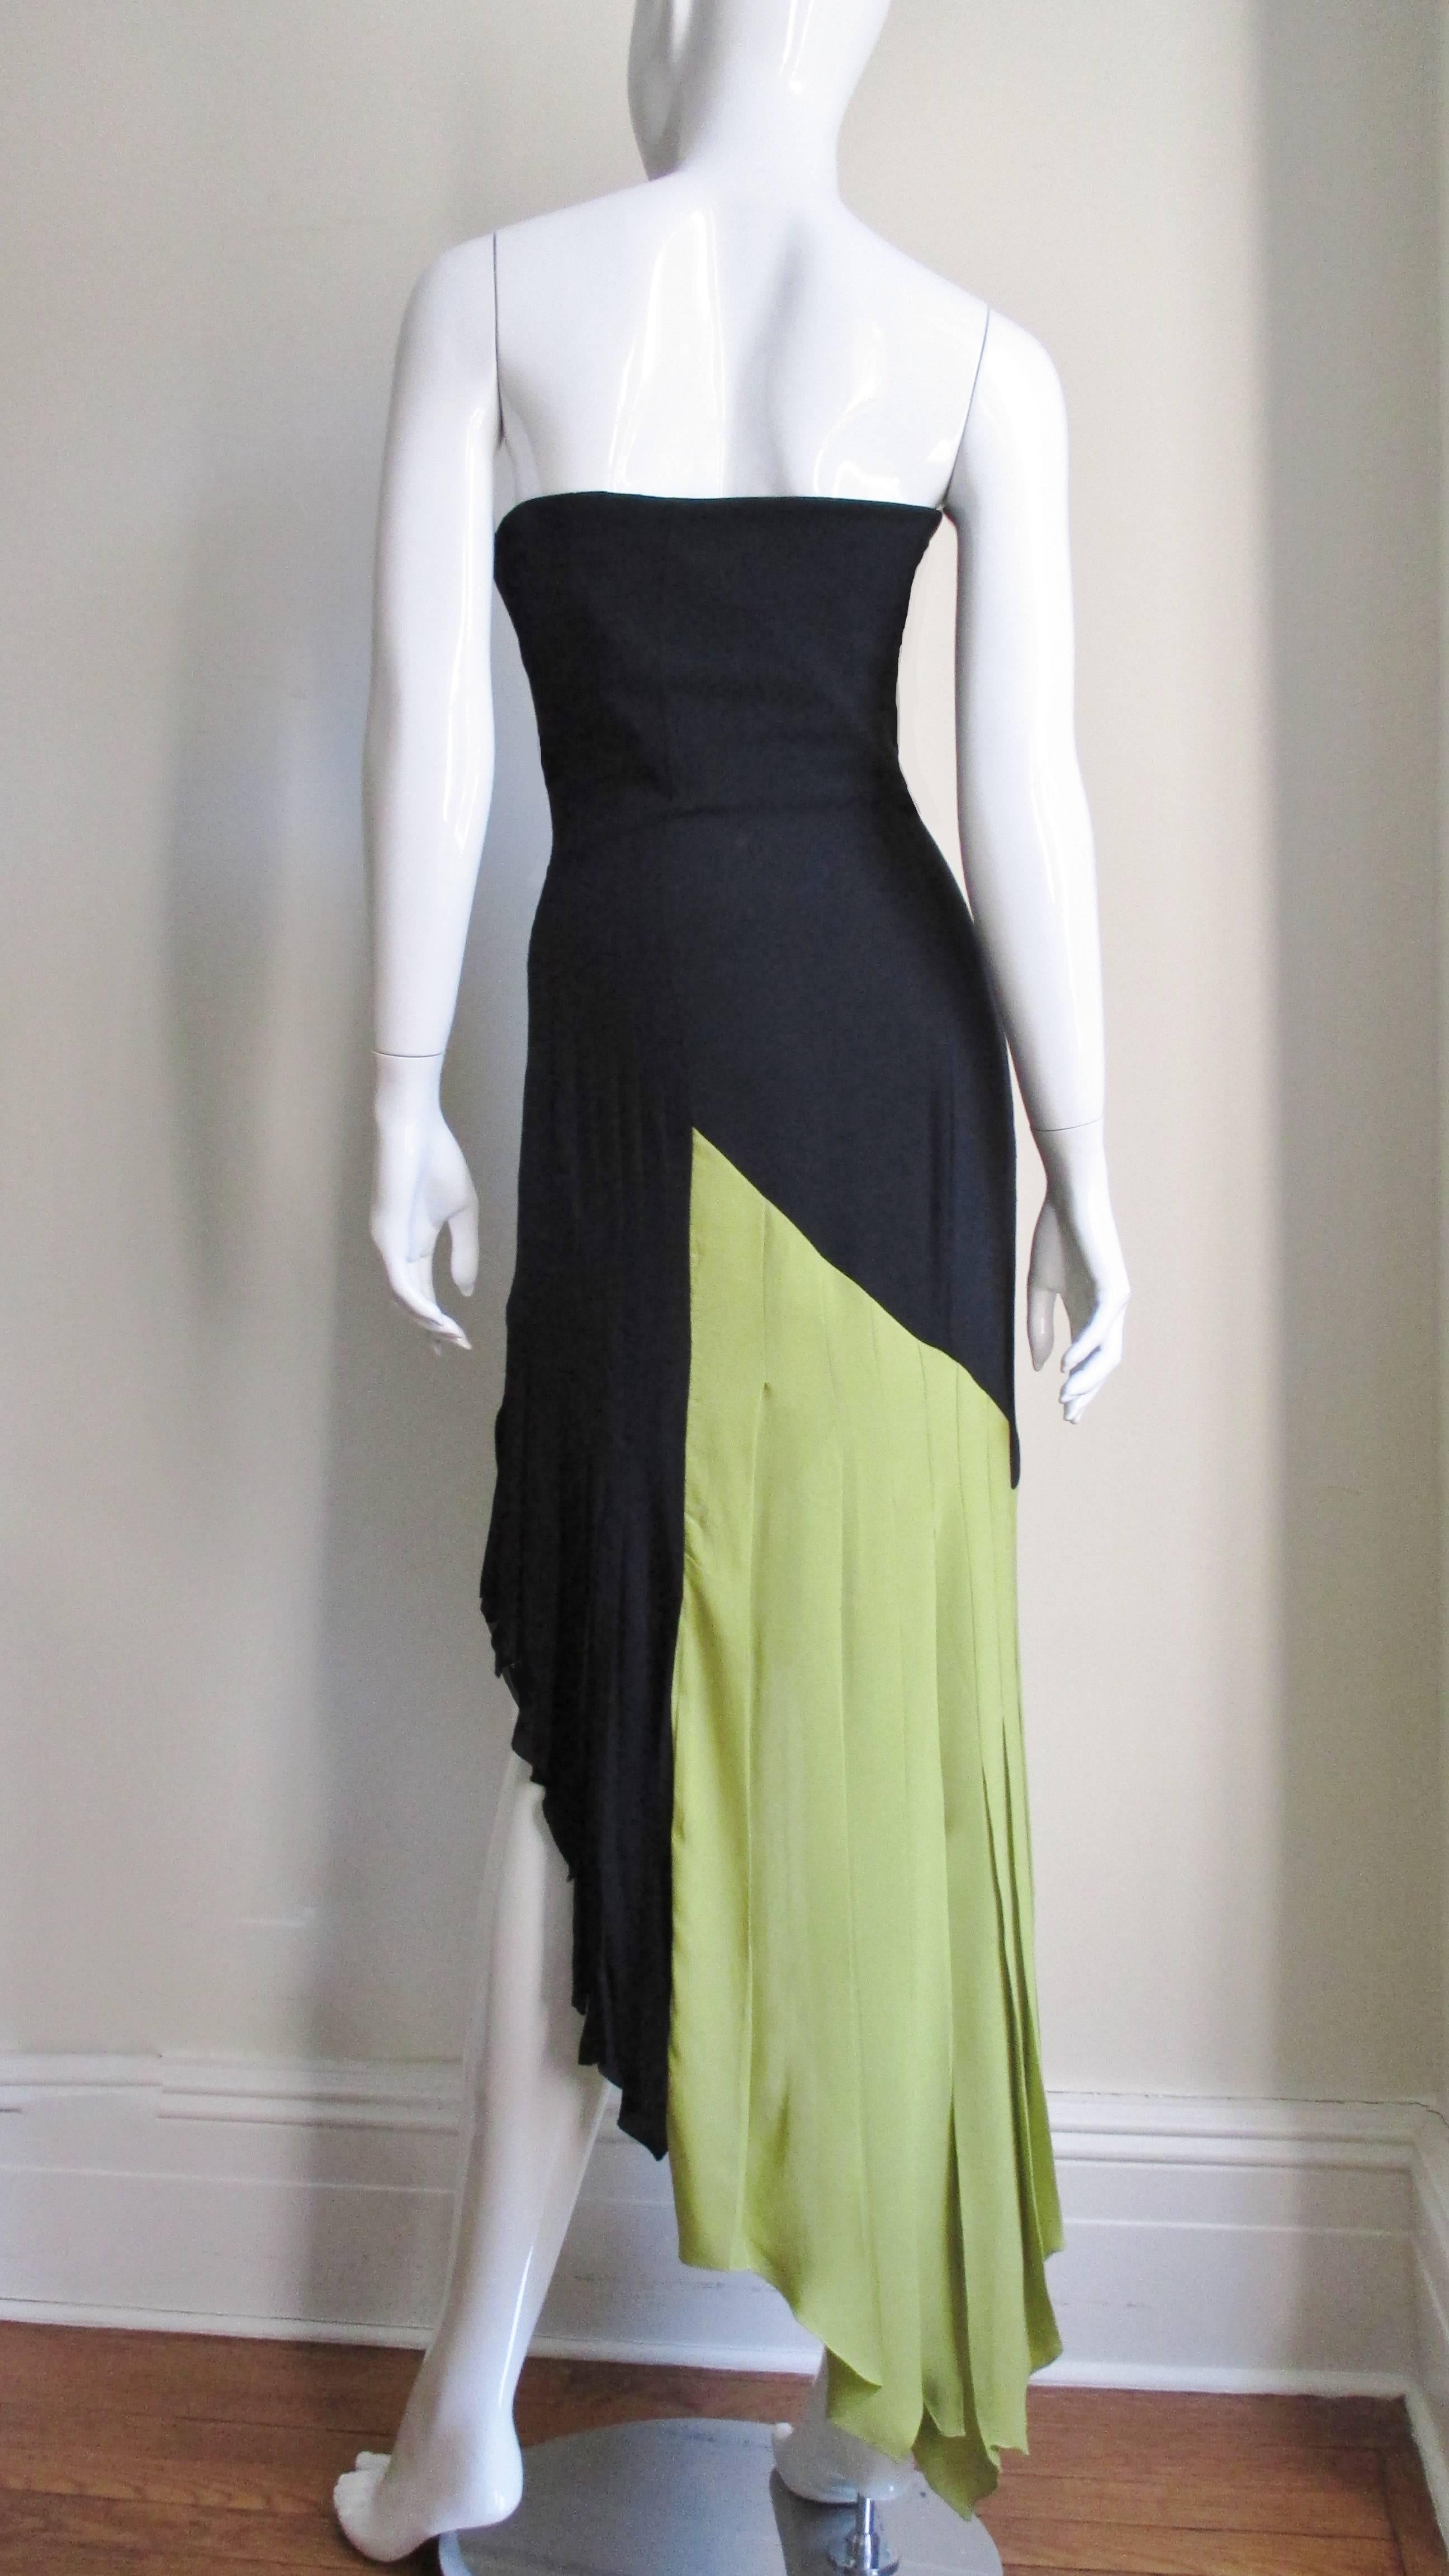 Gianni Versace New Color Block Strapless Dress 1990s For Sale 6